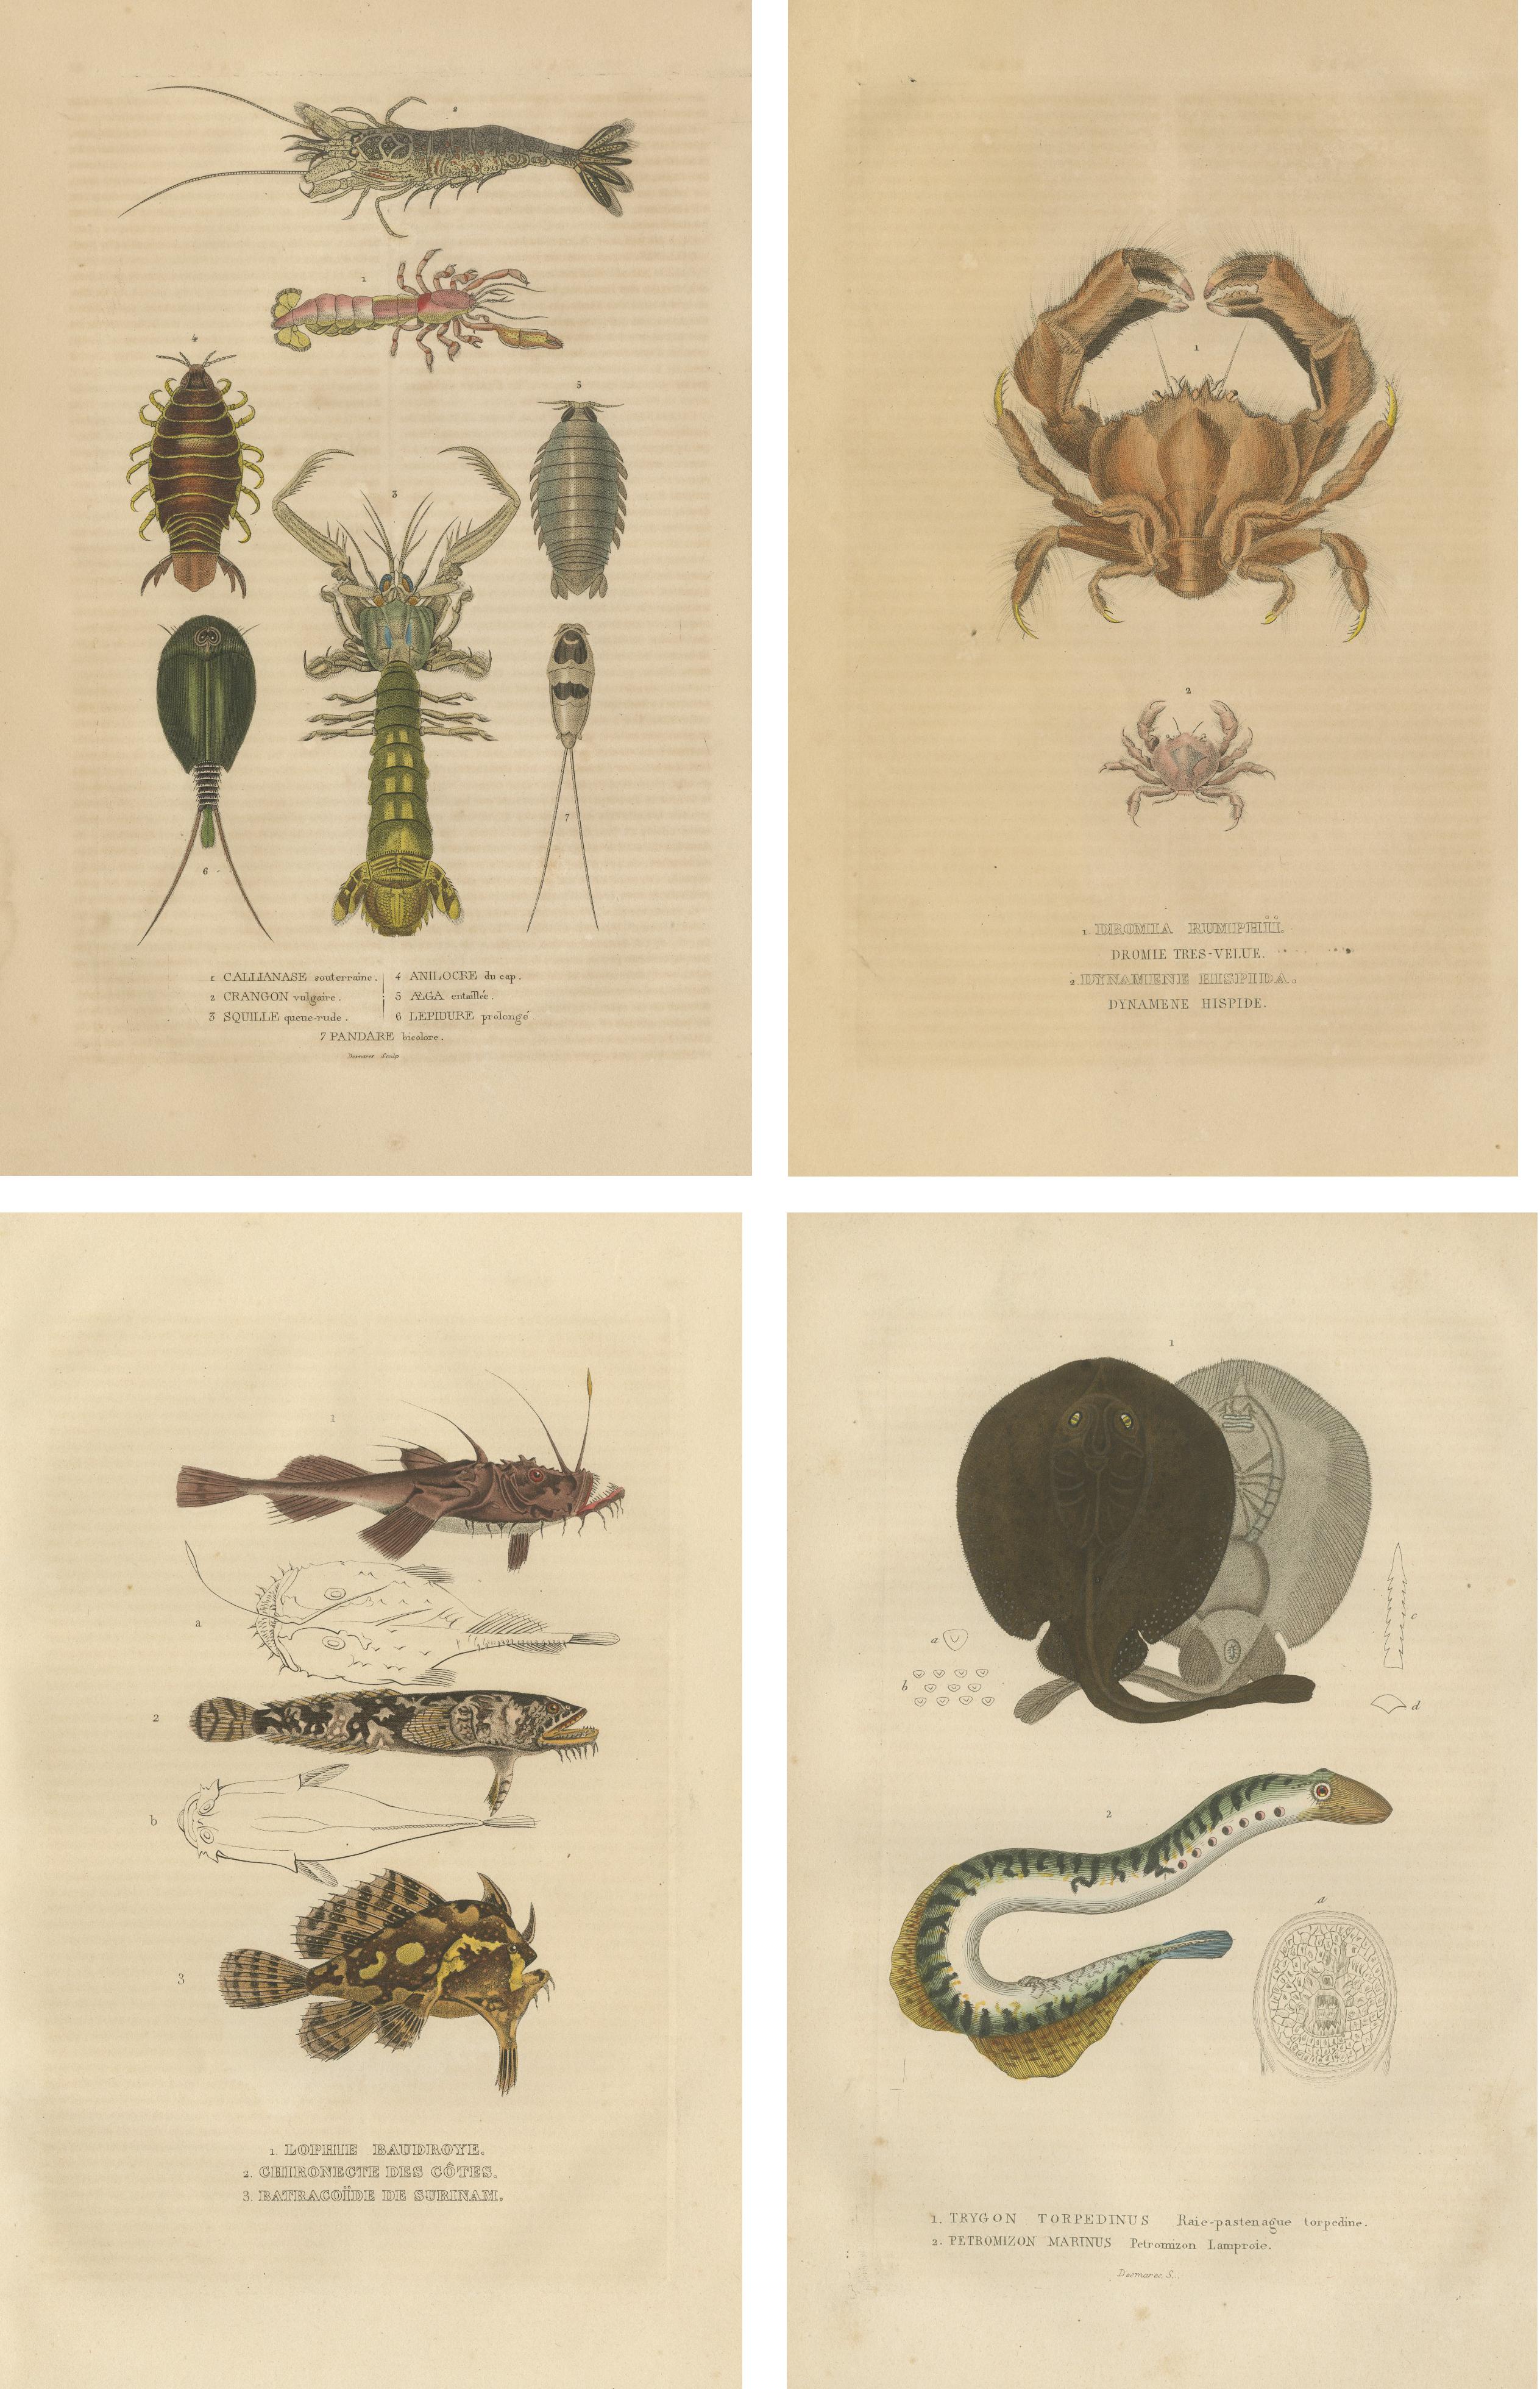 The collage for the catalogue features a curated selection of antique naturalist illustrations, each finely detailed and precisely hand-colored, celebrating the diversity of aquatic and arthropod species:

1. One illustration depicts a **lobster**,